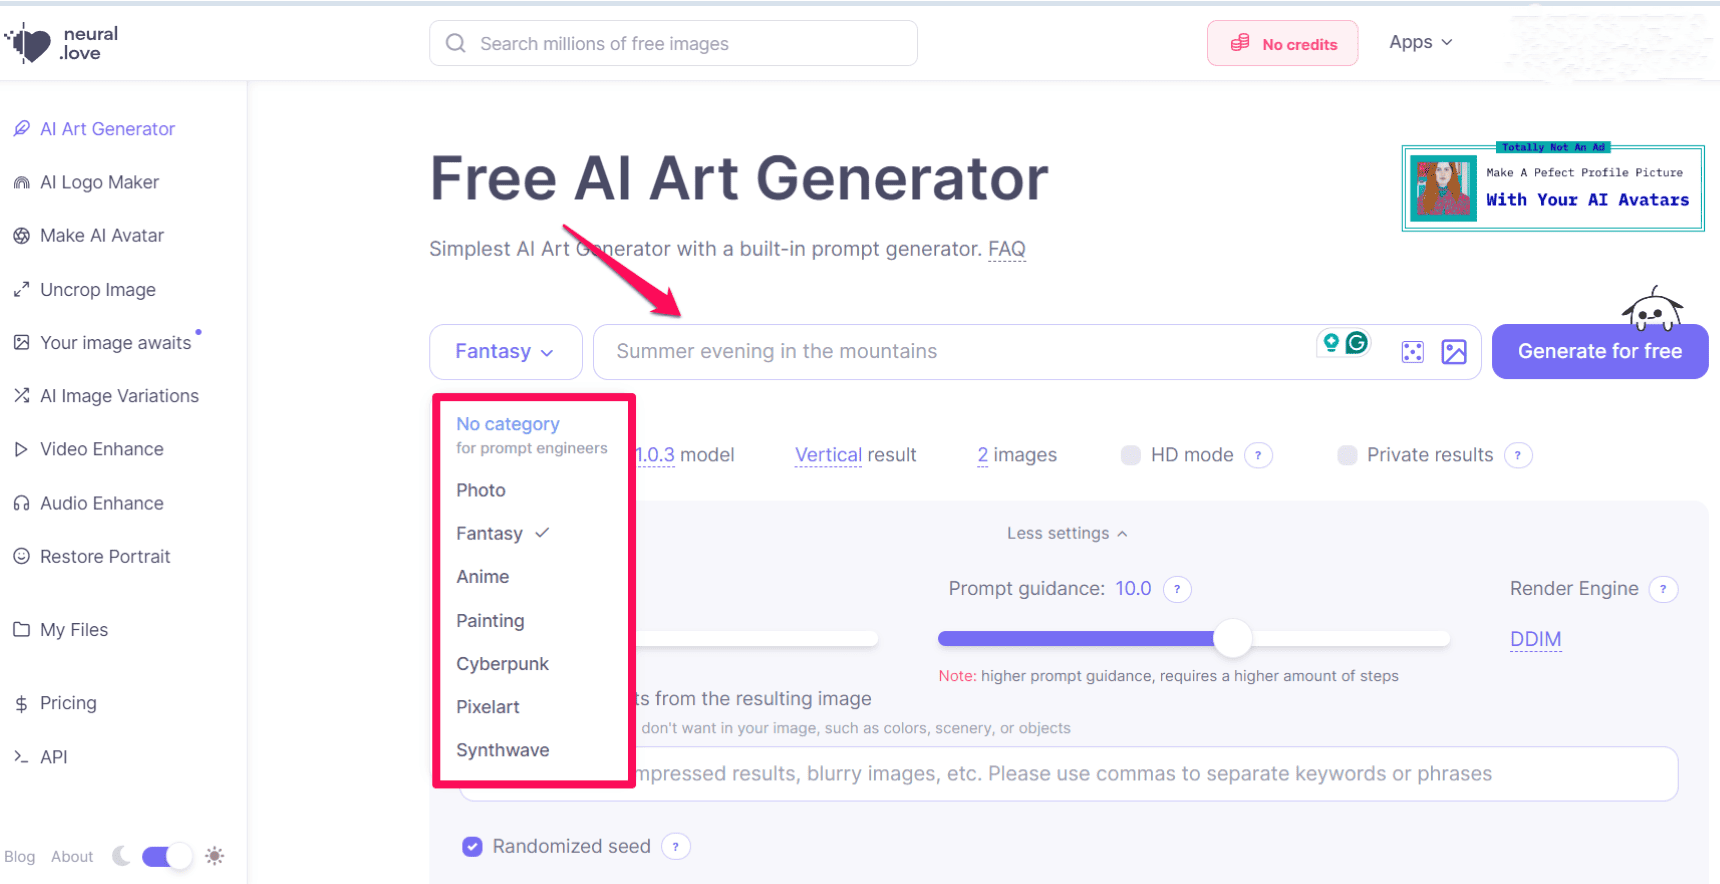 Choosing a category and adding a prompt into the Neuron Love AI art generator